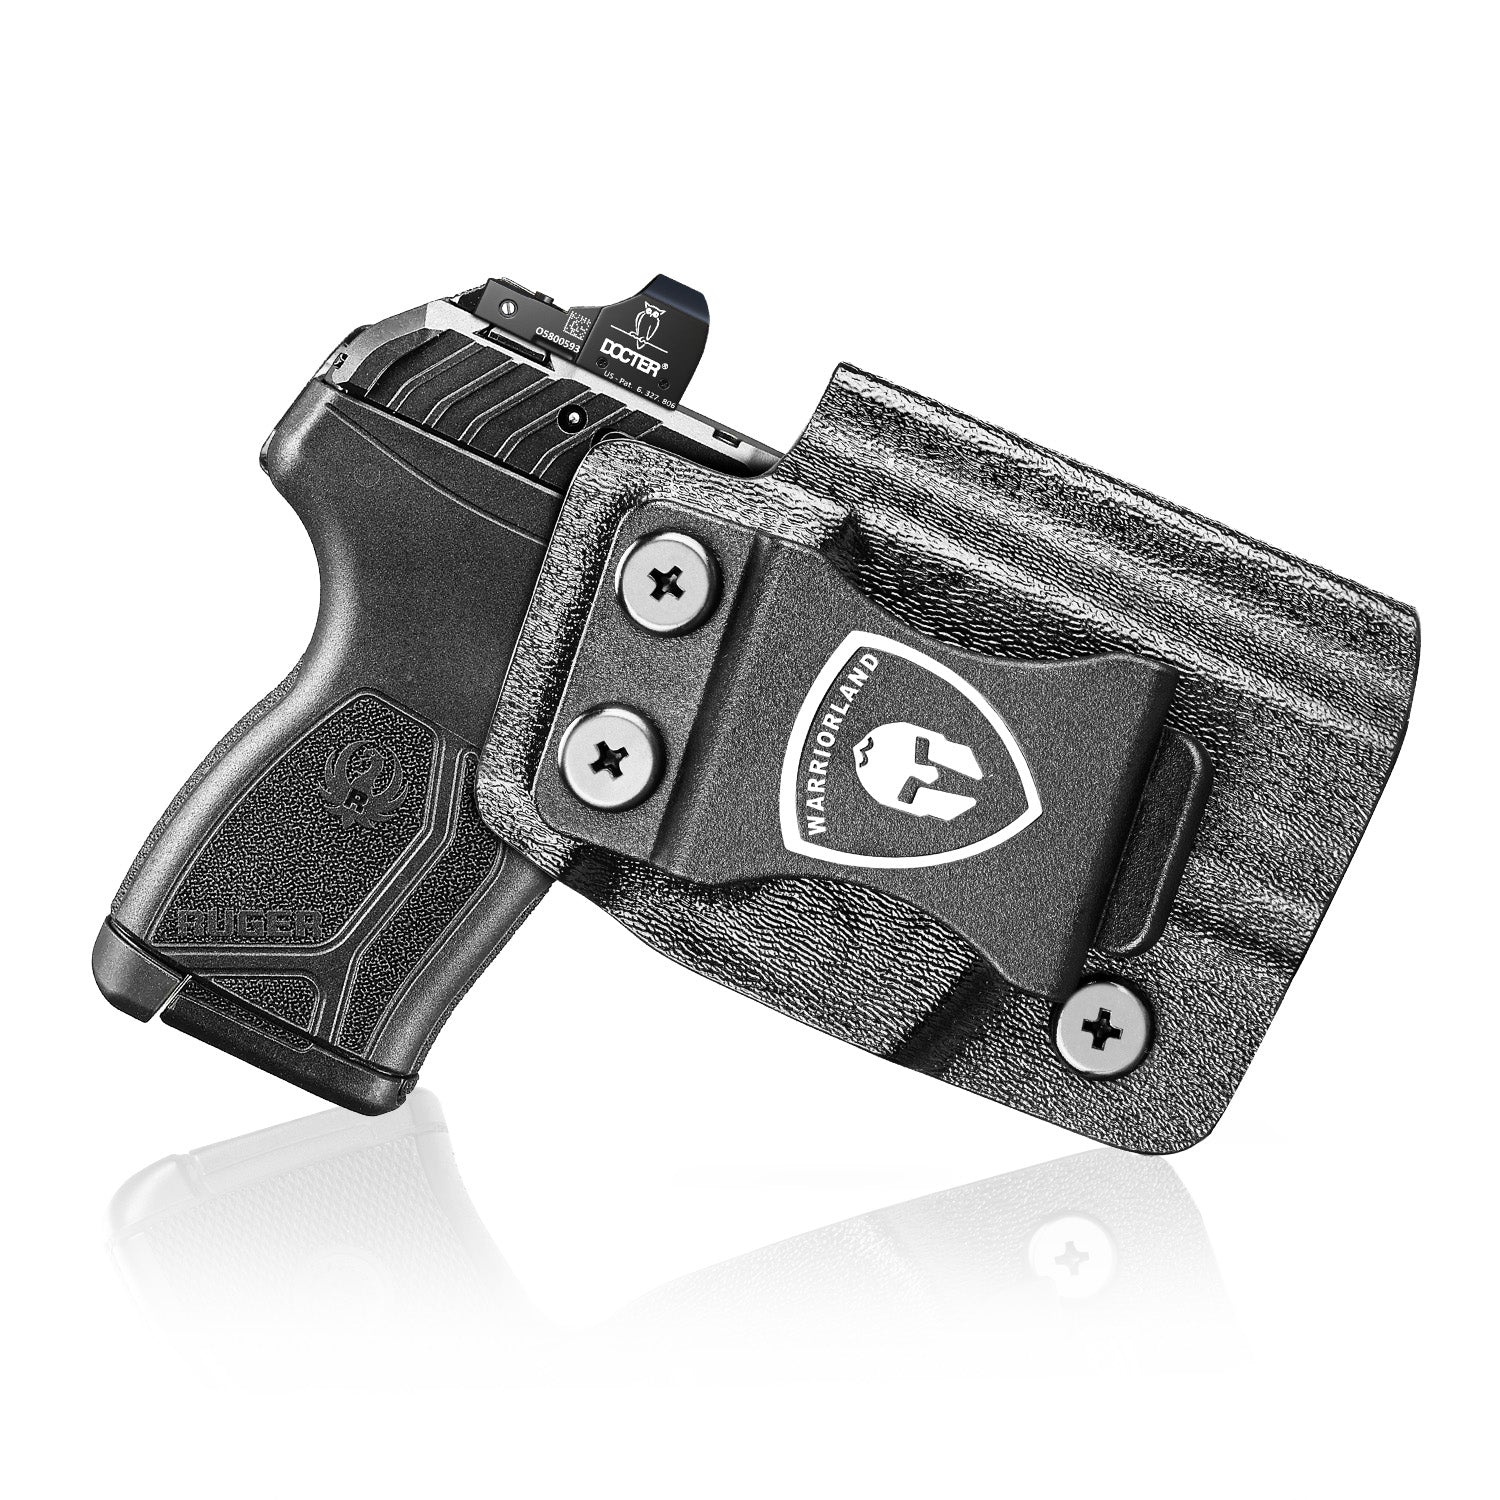 Ruger LCP MAX Holster IWB Kydex Holster Optics Cut: Ruger LCP Max .380 Pistol, Inside Waistband Appendix Carry MAX .380 Holster, Adj. Retention & Cant, Right/Left Hand Optional|WARRIORLAND